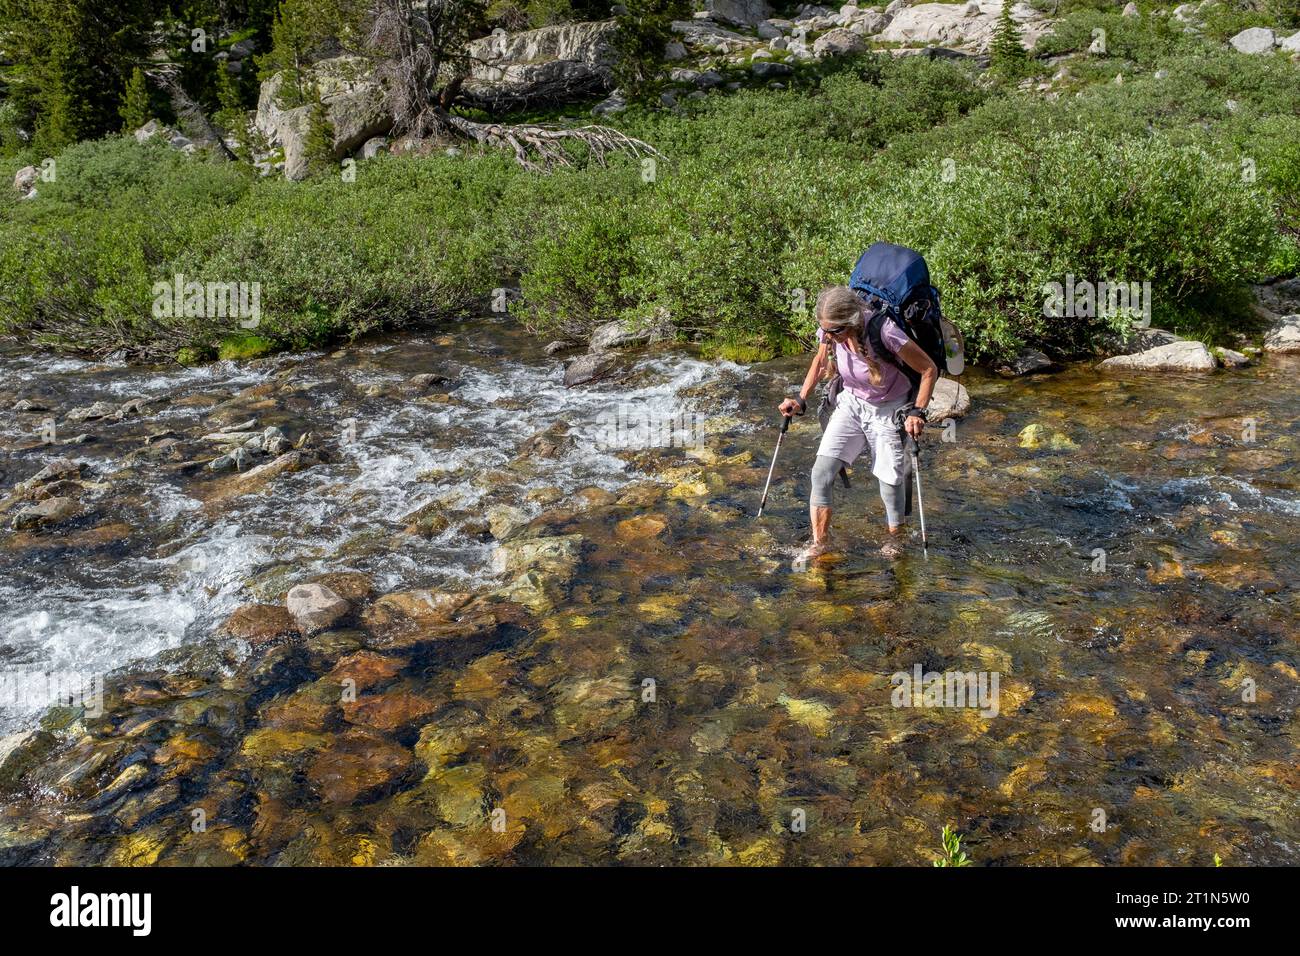 WY05475-00....WYOMING -  Woman crossing a stream near Elbow Lake along the Contiental Divide Trail in the Bridger Wilderness, Bridger National Forest. Stock Photo